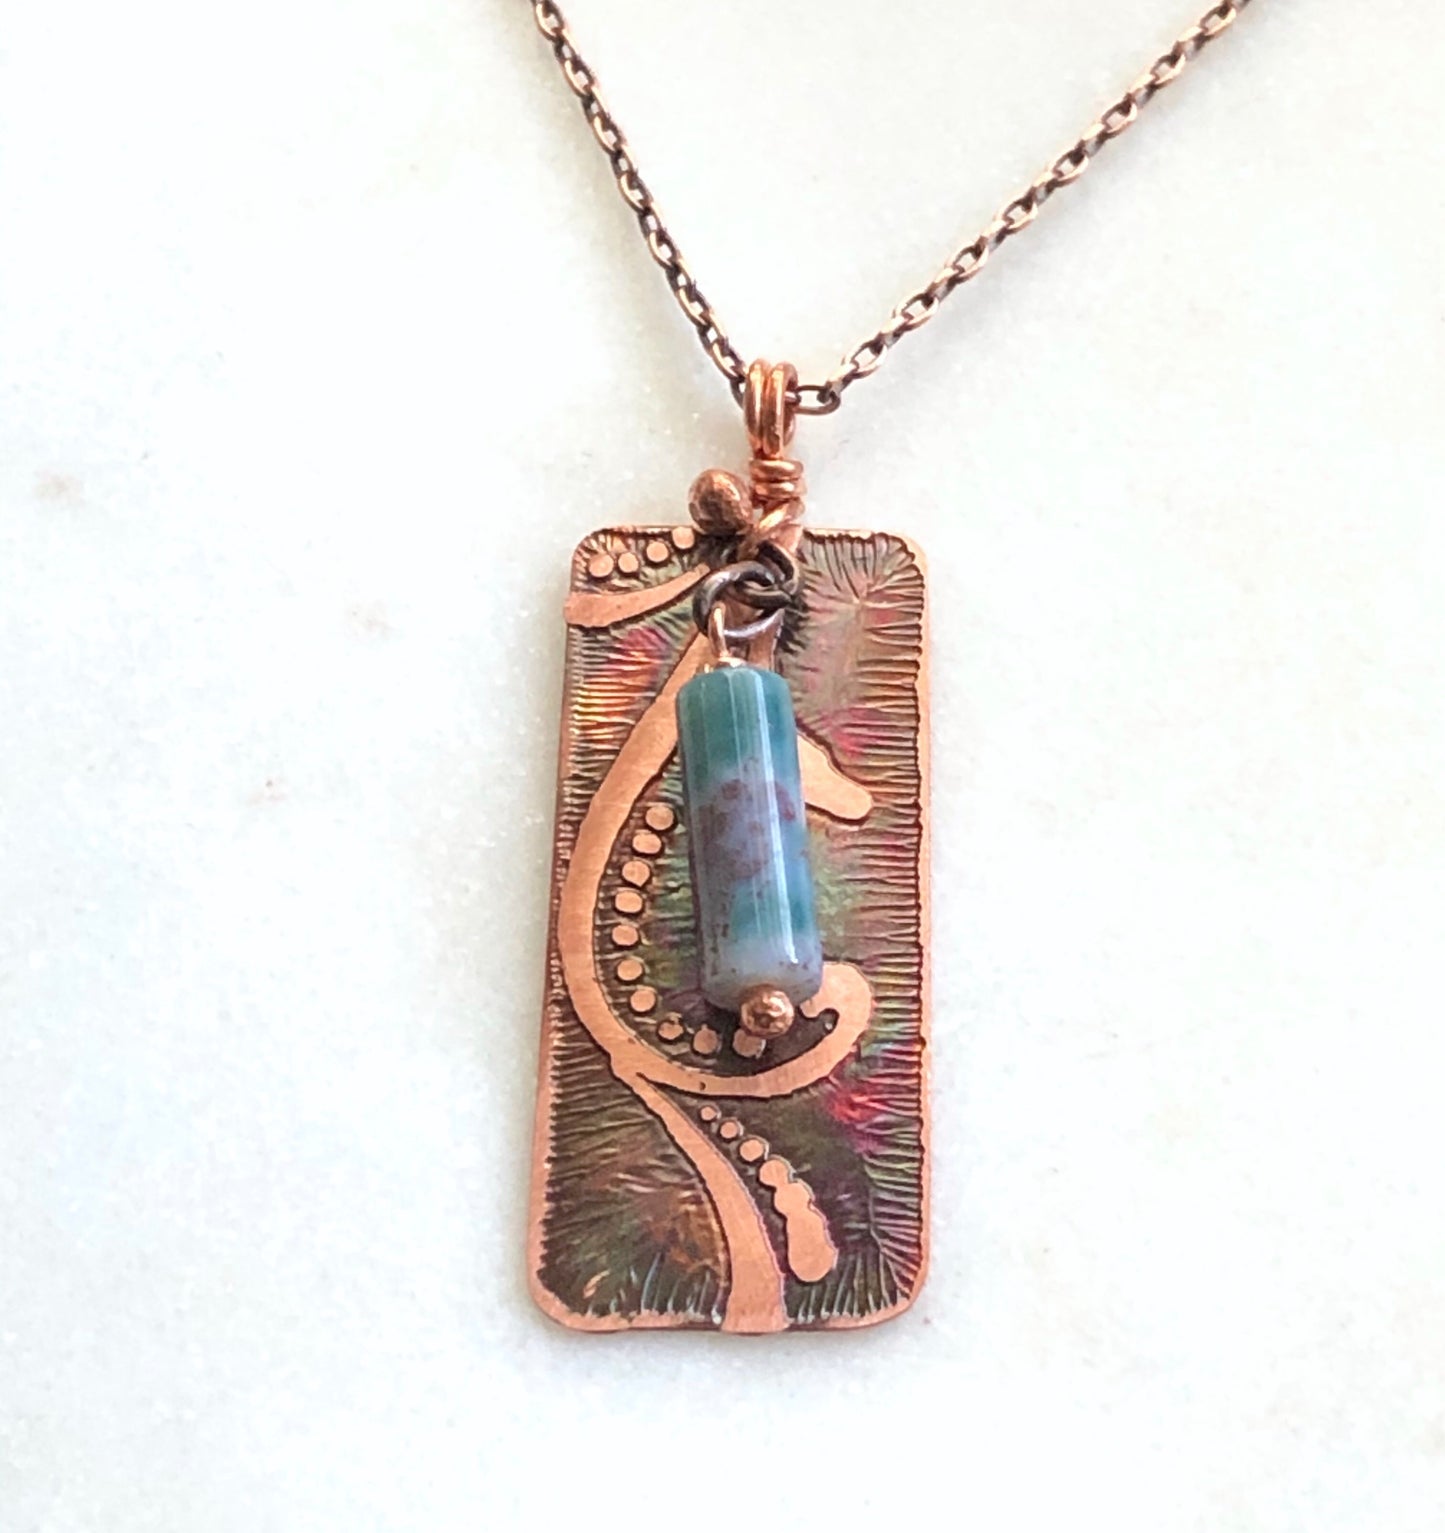 Acid etched copper swirl necklace with moss agate